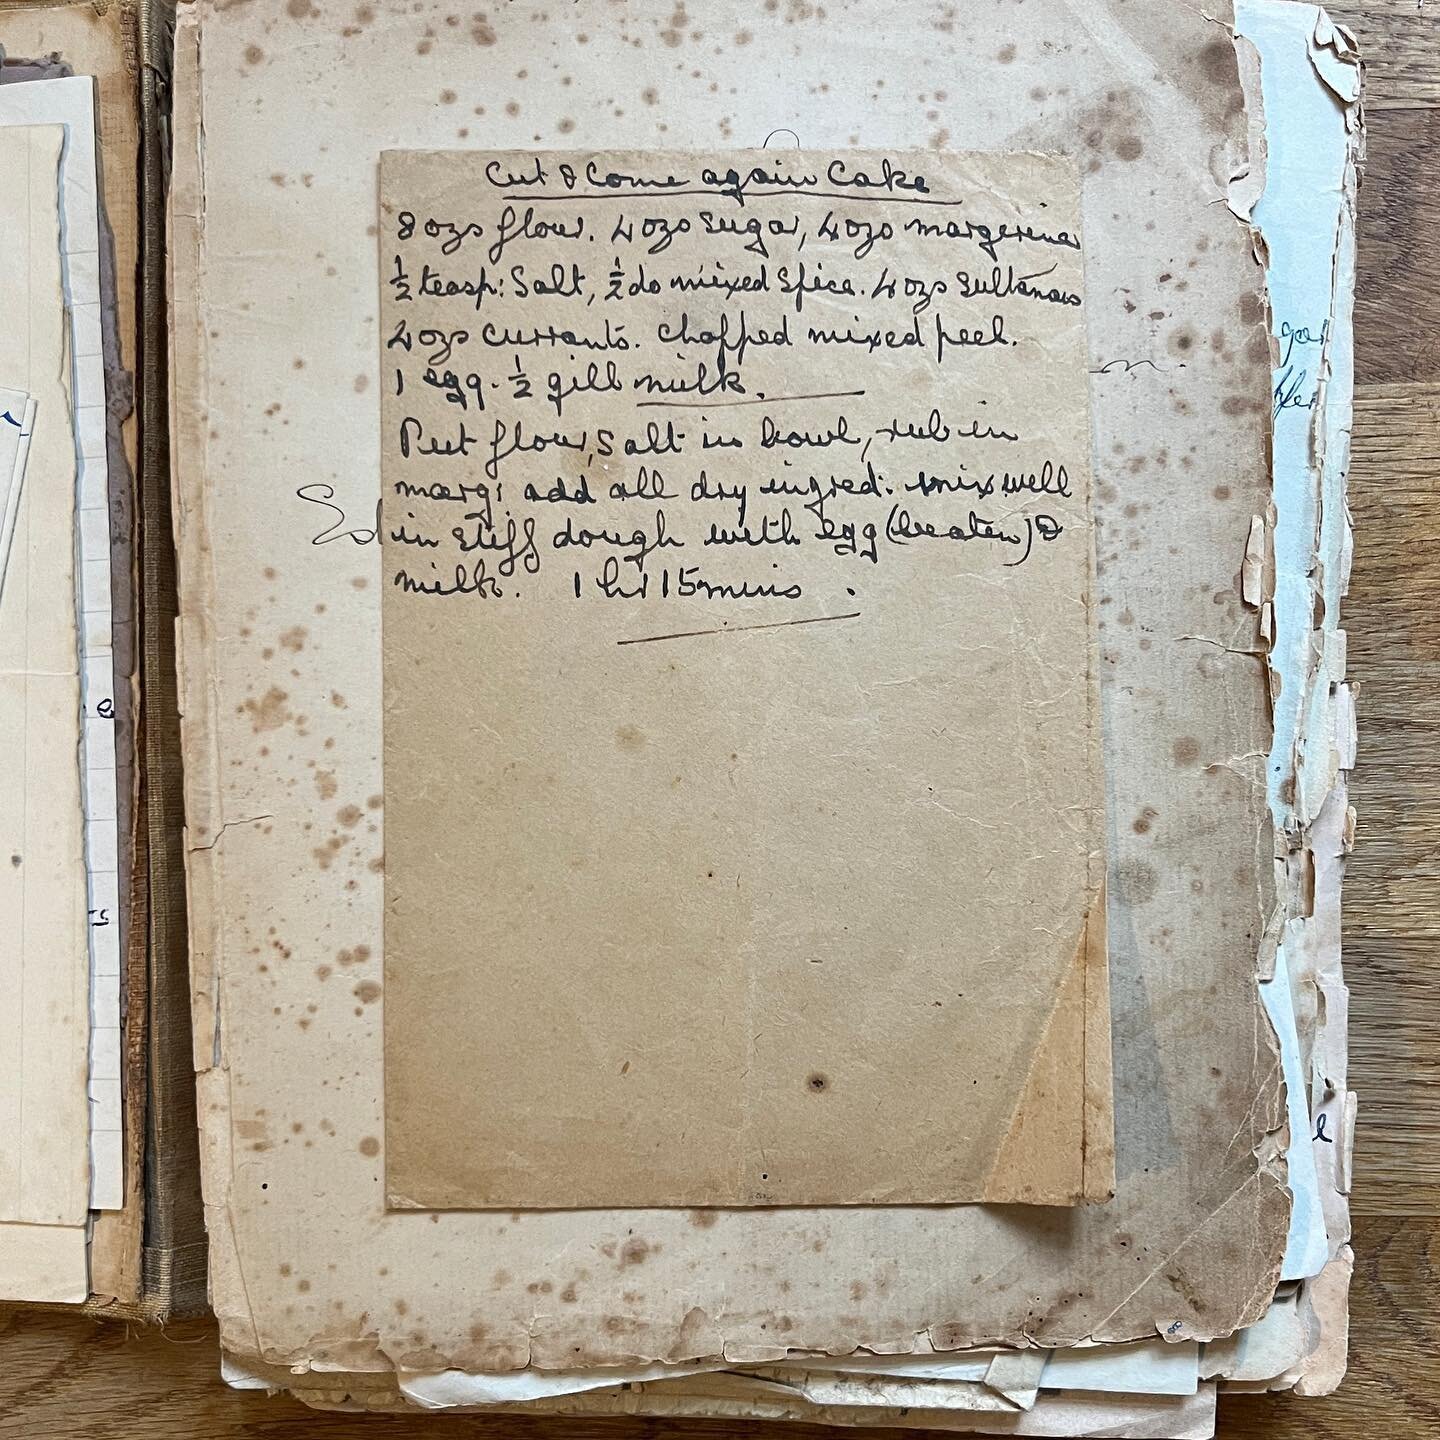 At the weekend I ticked the first recipe from Great Grandma&rsquo;s book off the list. I chose the wonderfully named &lsquo;Cut and Come Again&rsquo; Cake! (They just don&rsquo;t name cakes like that anymore&hellip;) It&rsquo;s definitely going on th